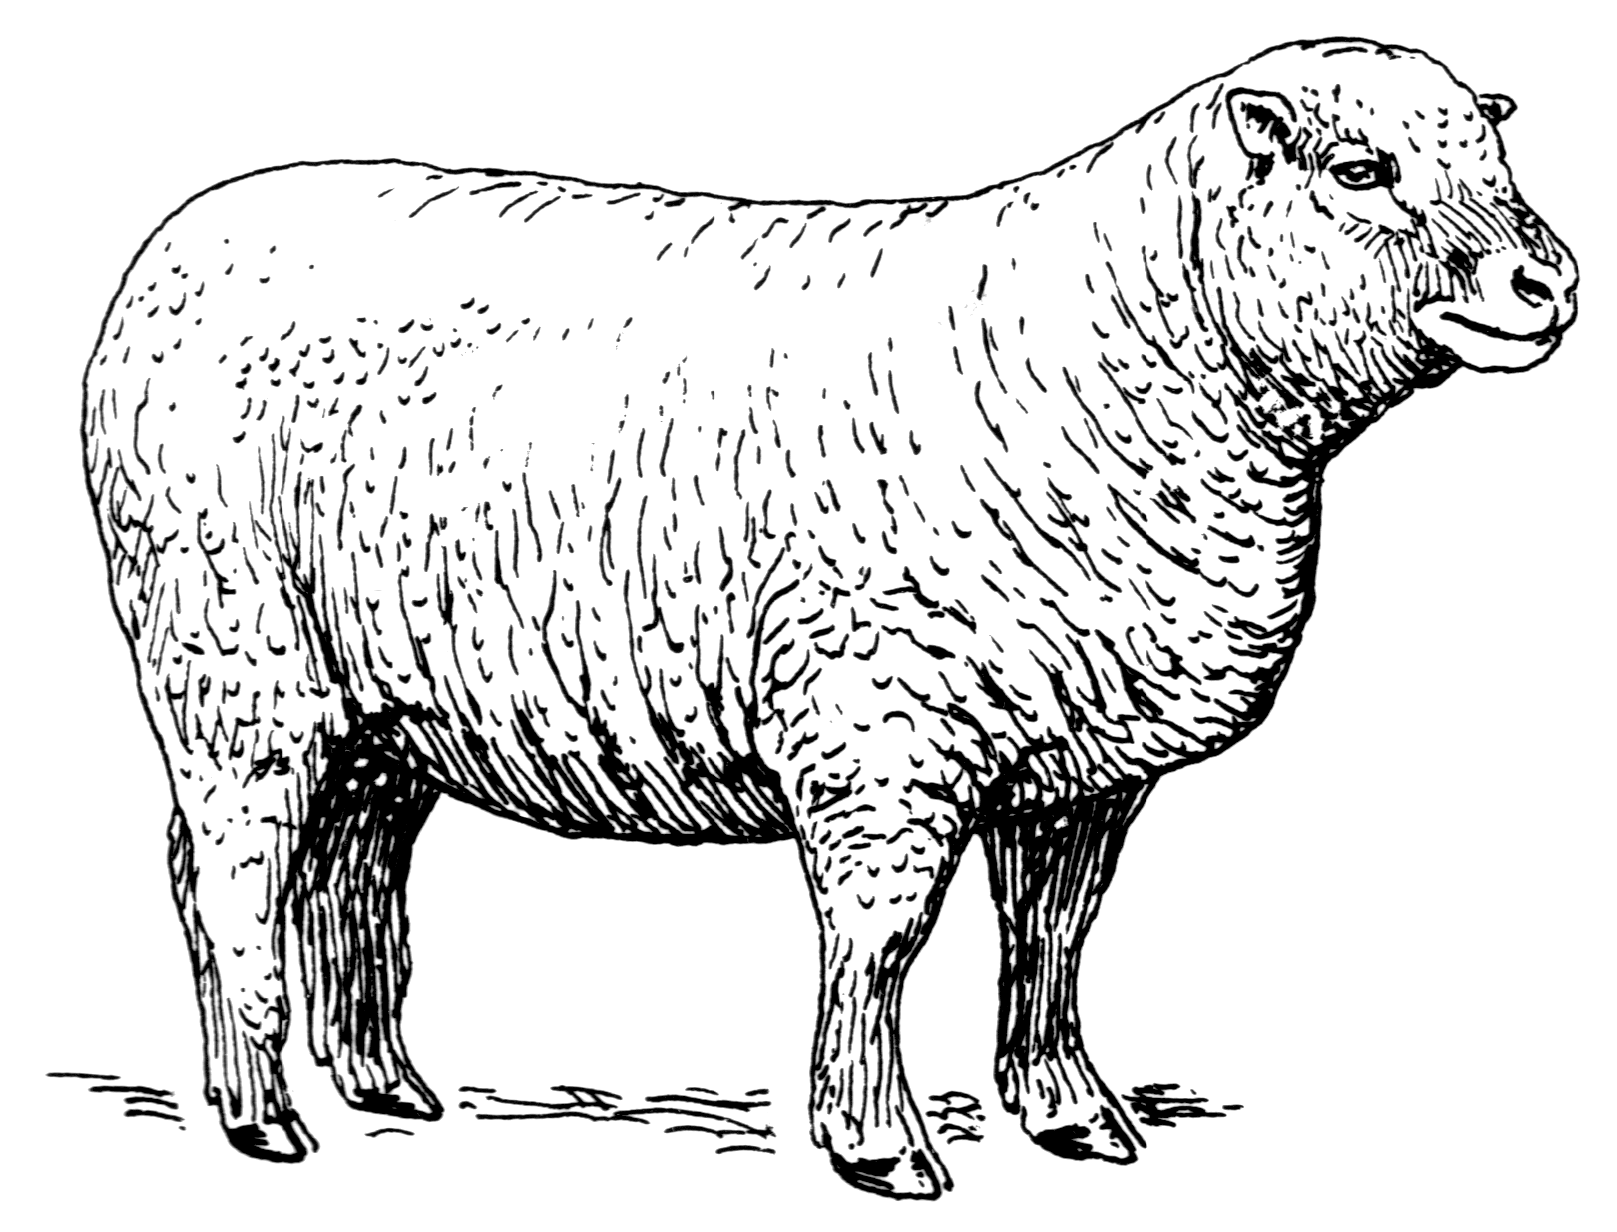 File:Sheep (PSF).png - Wikimedia Commons